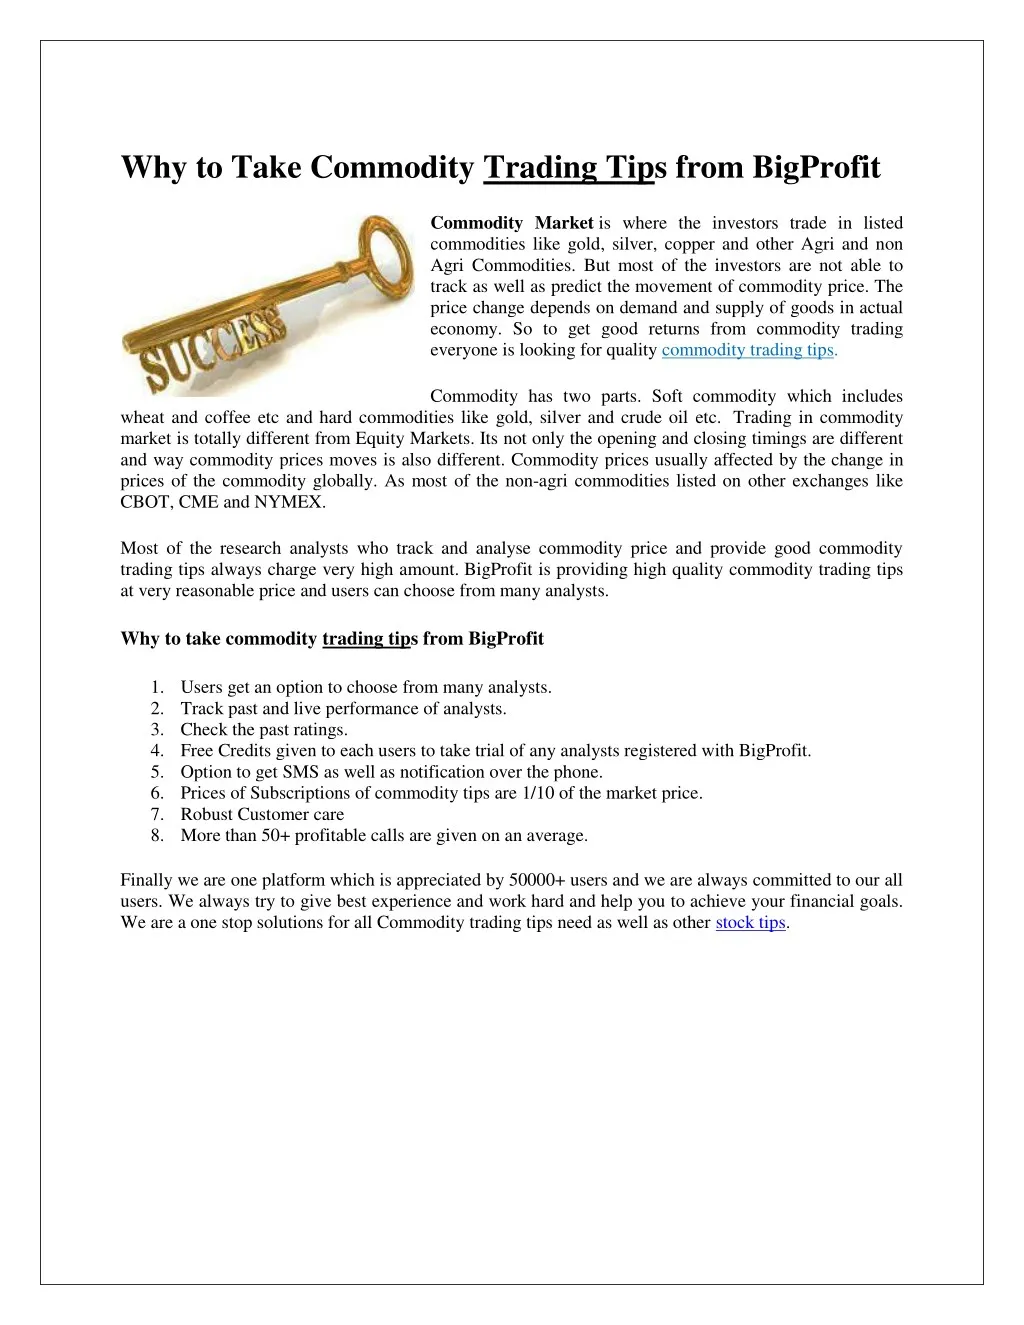 why to take commodity trading tips from bigprofit